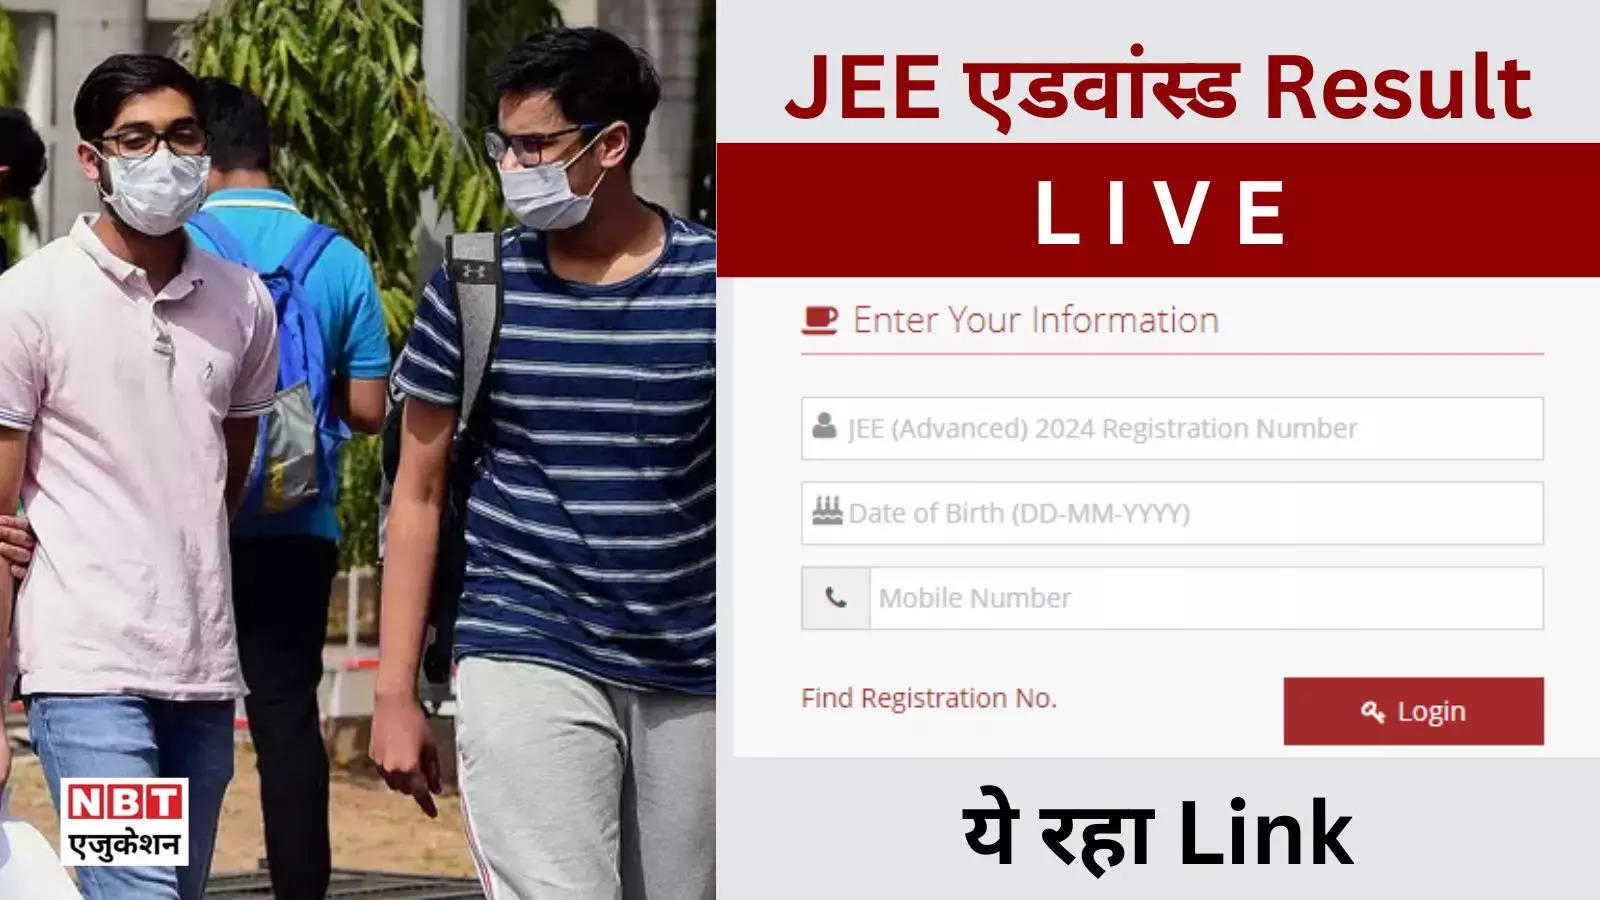 JEE Advanced 2024 Result LIVE: IIT JEE Advanced result in some time, here is the direct link to check